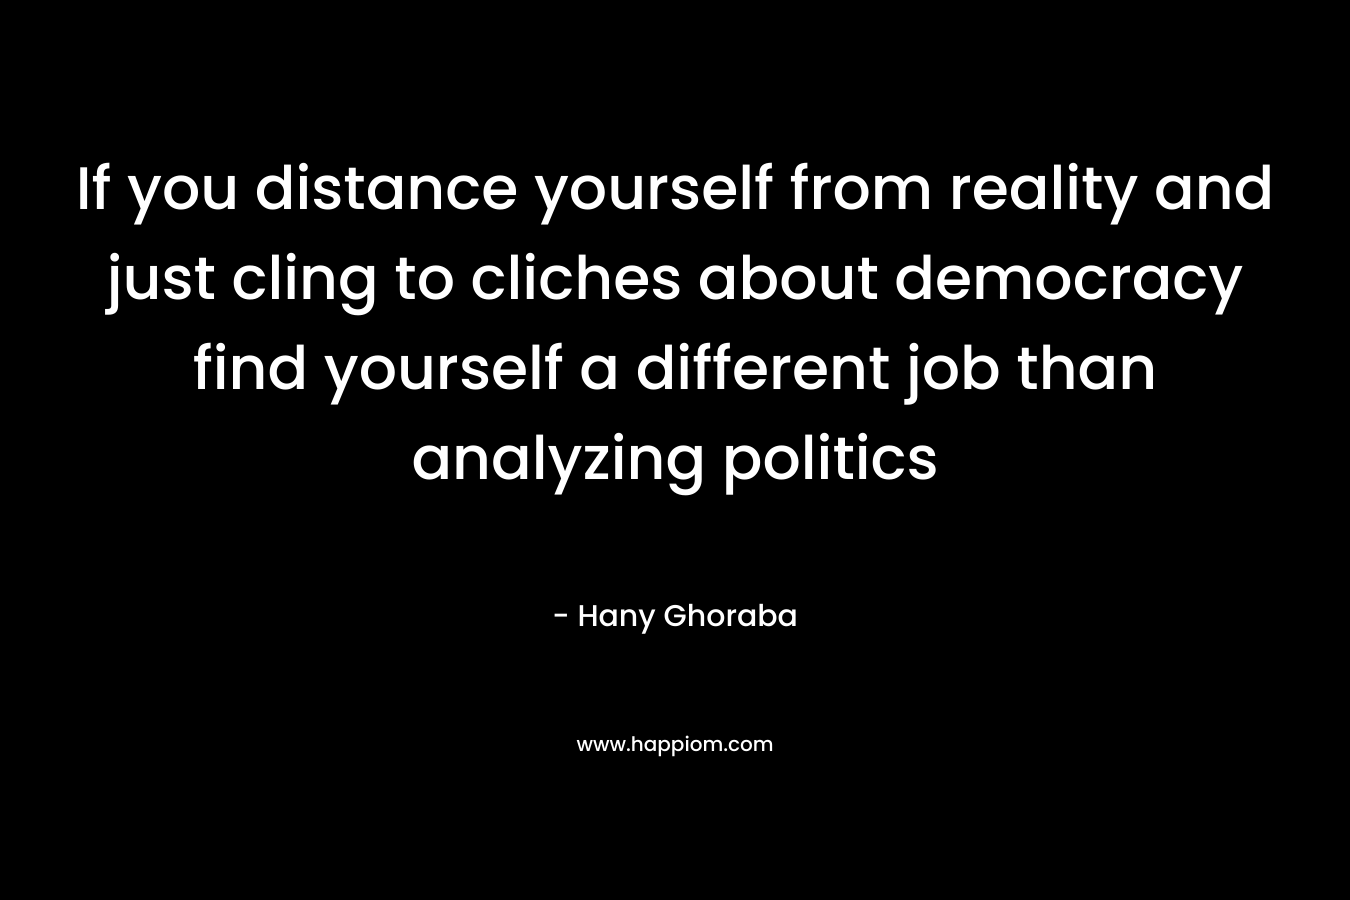 If you distance yourself from reality and just cling to cliches about democracy find yourself a different job than analyzing politics – Hany Ghoraba